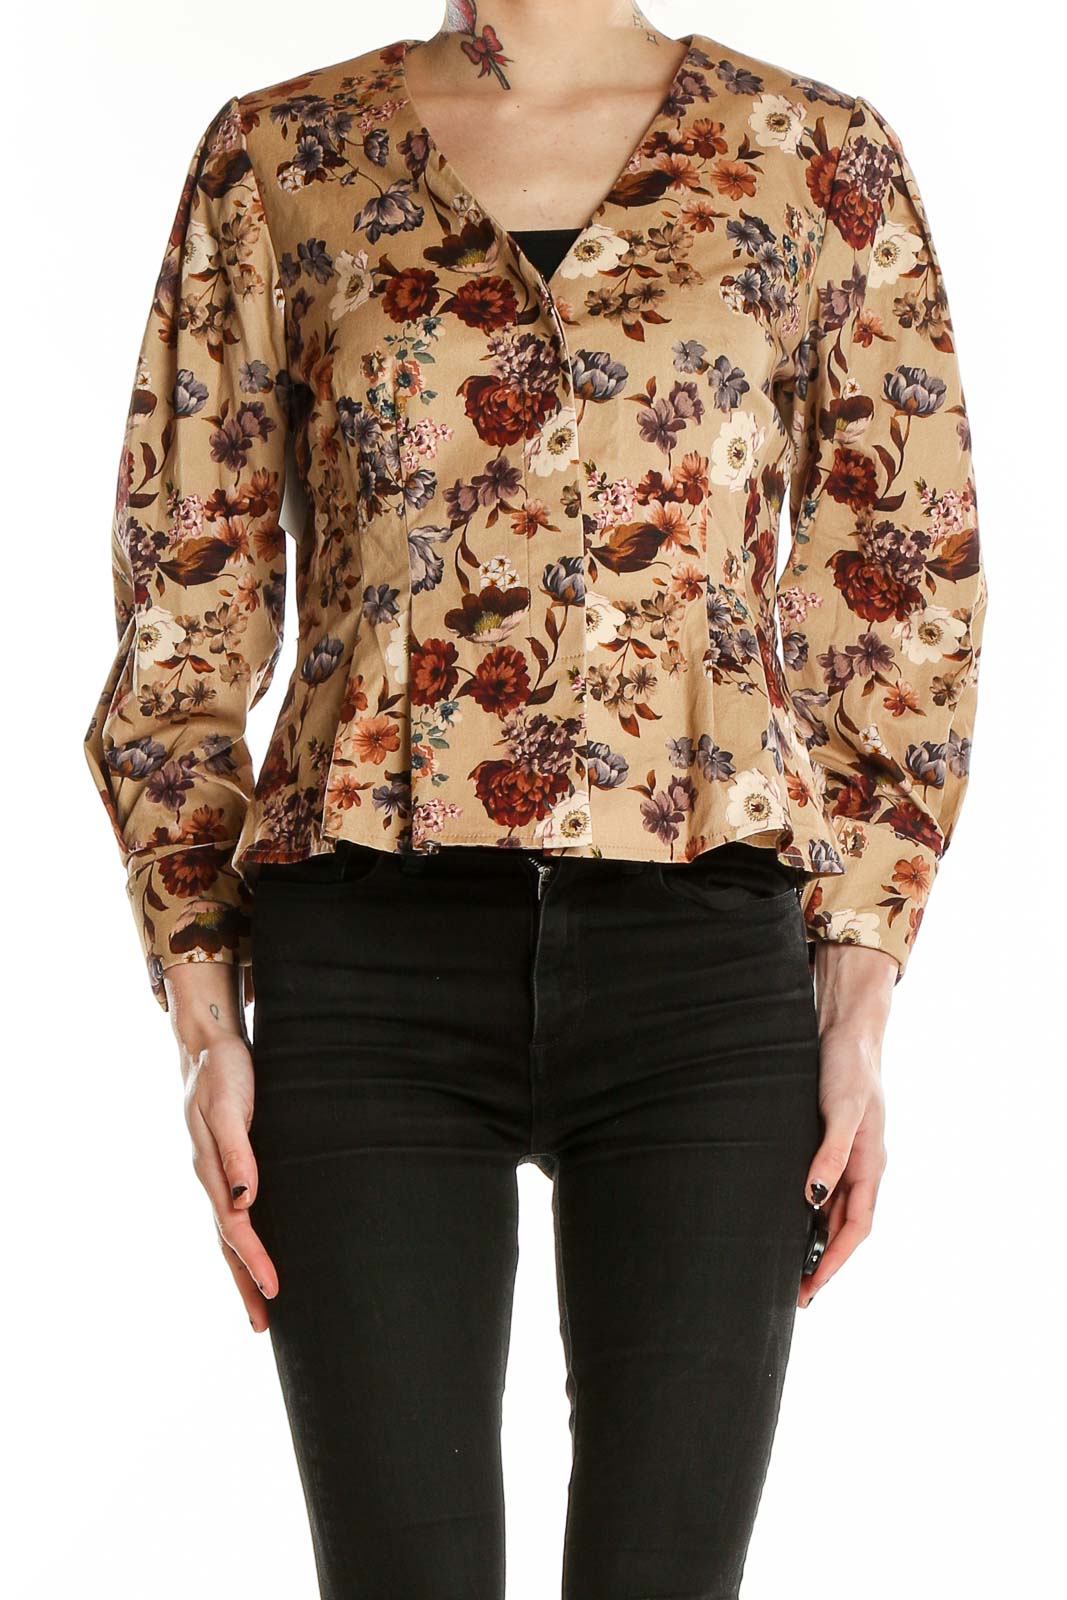 Brown Floral Print Top Front